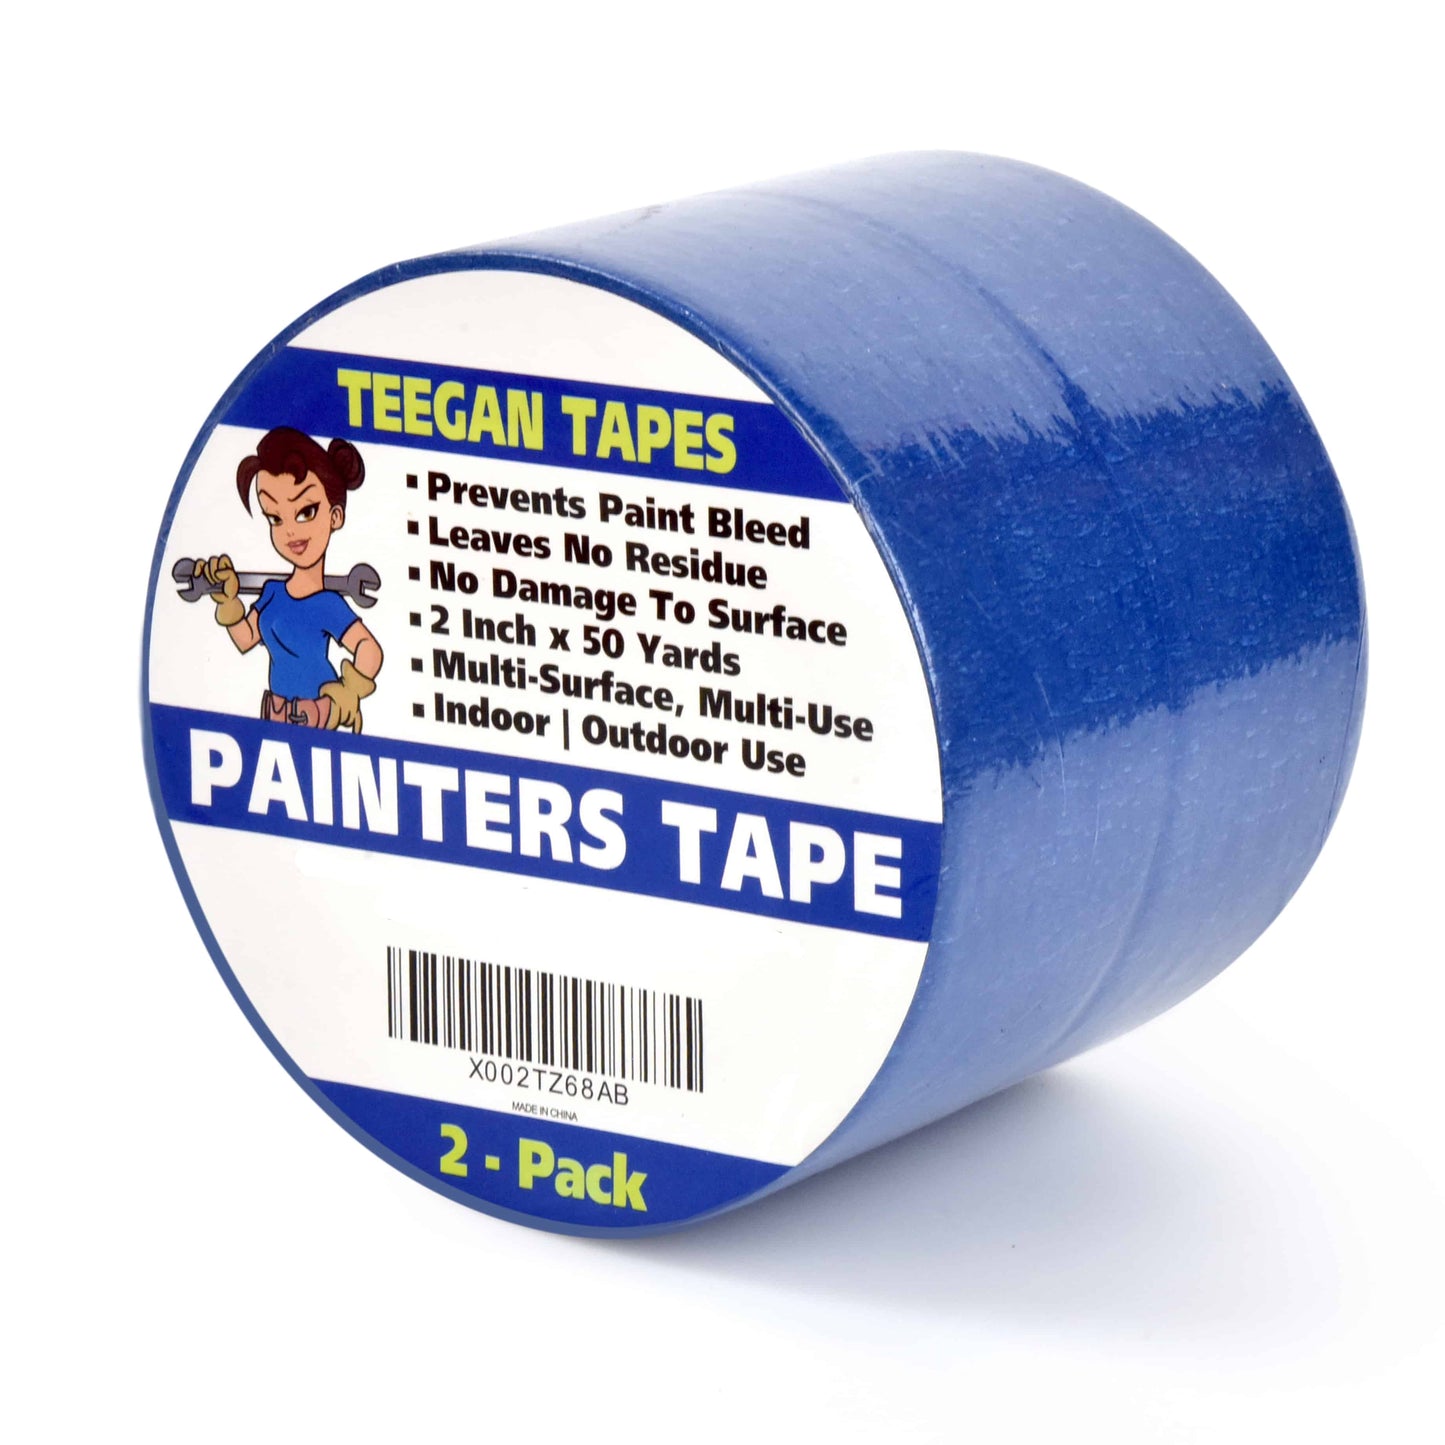 Painters Tape (2-Pack) | 2 Inch by 50 yards | Prevents Paint Bleed | Leaves No Residue | by Teegan Tapes